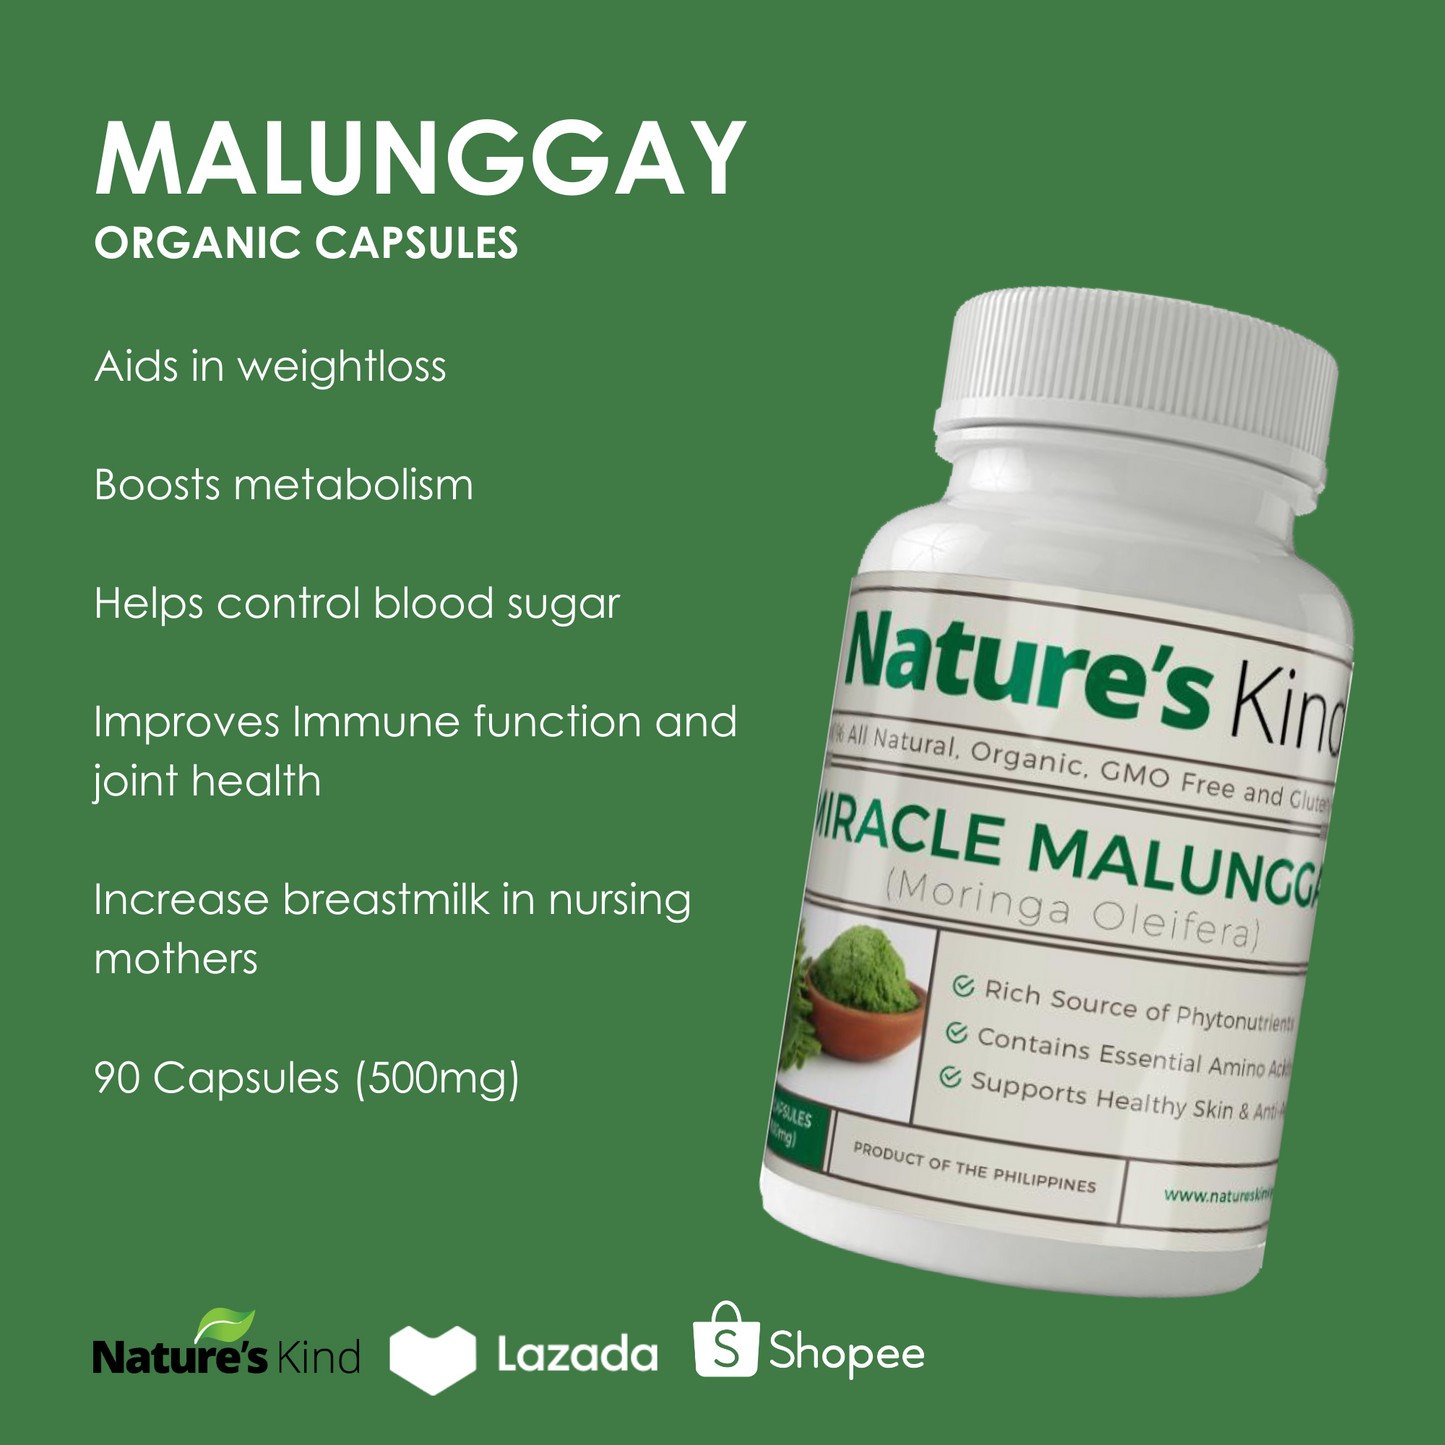 Organic Miracle Malunggay Capsules - Buy One Take One Promo!